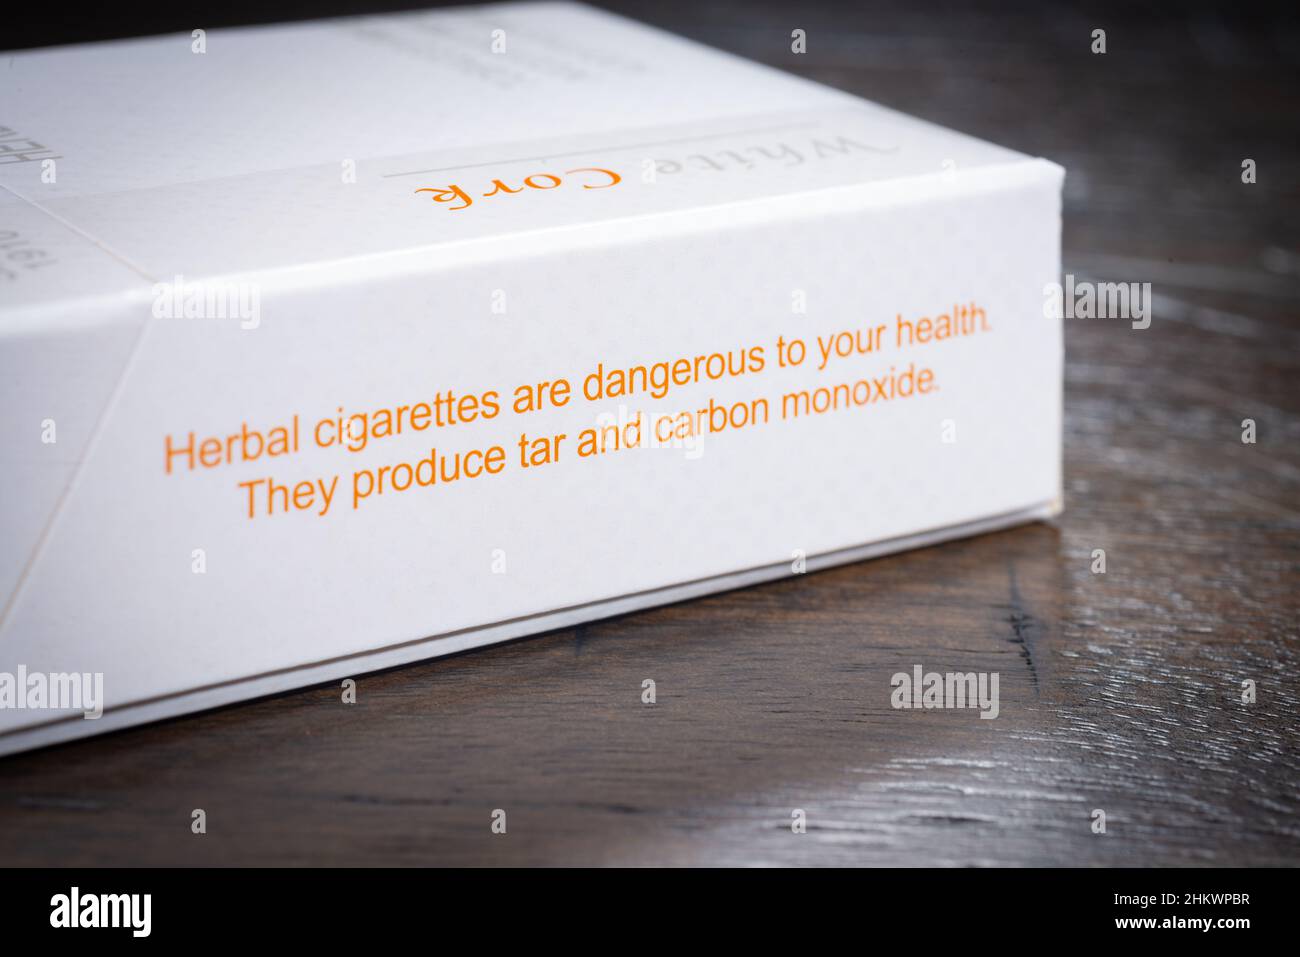 SAINT CLOUD, MINNESOTA - 5 FEBRUARY, 2022: A pack of Honeyrose Brand herbal cigarettes sits on a wooden table. Stock Photo